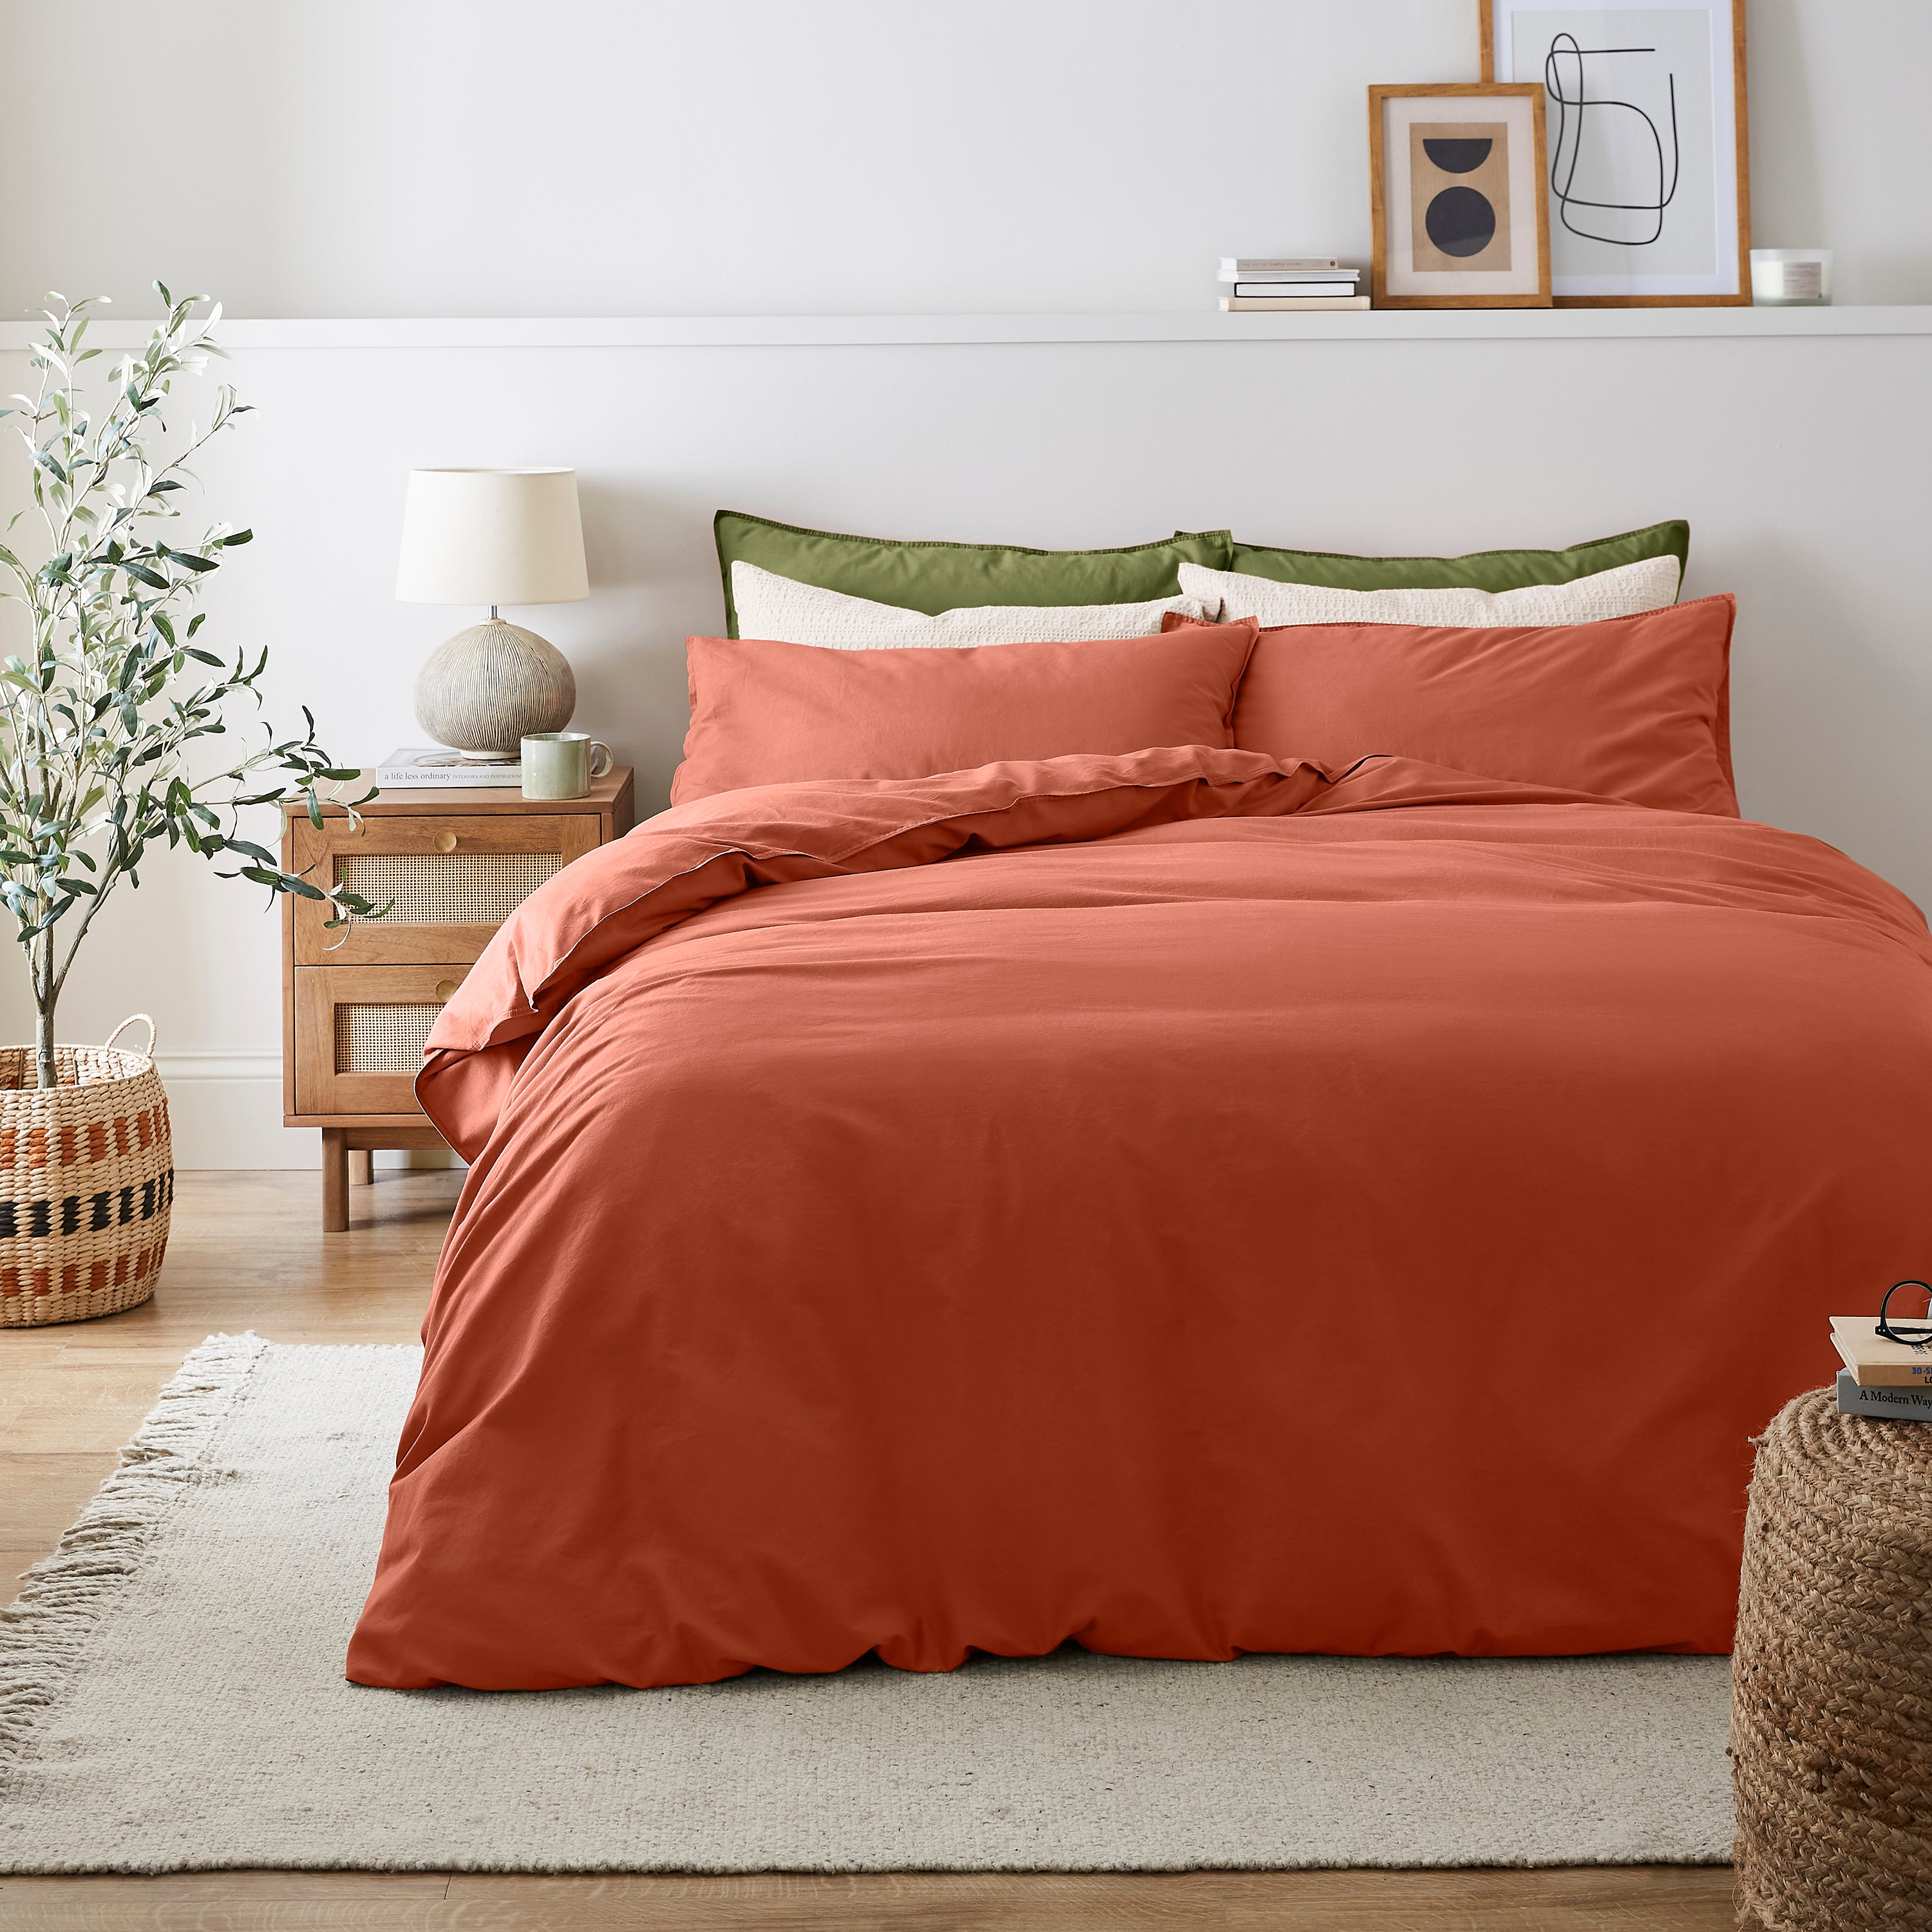 Soft Washed Recycled Cotton Duvet Cover and Pillowcase Set Orange